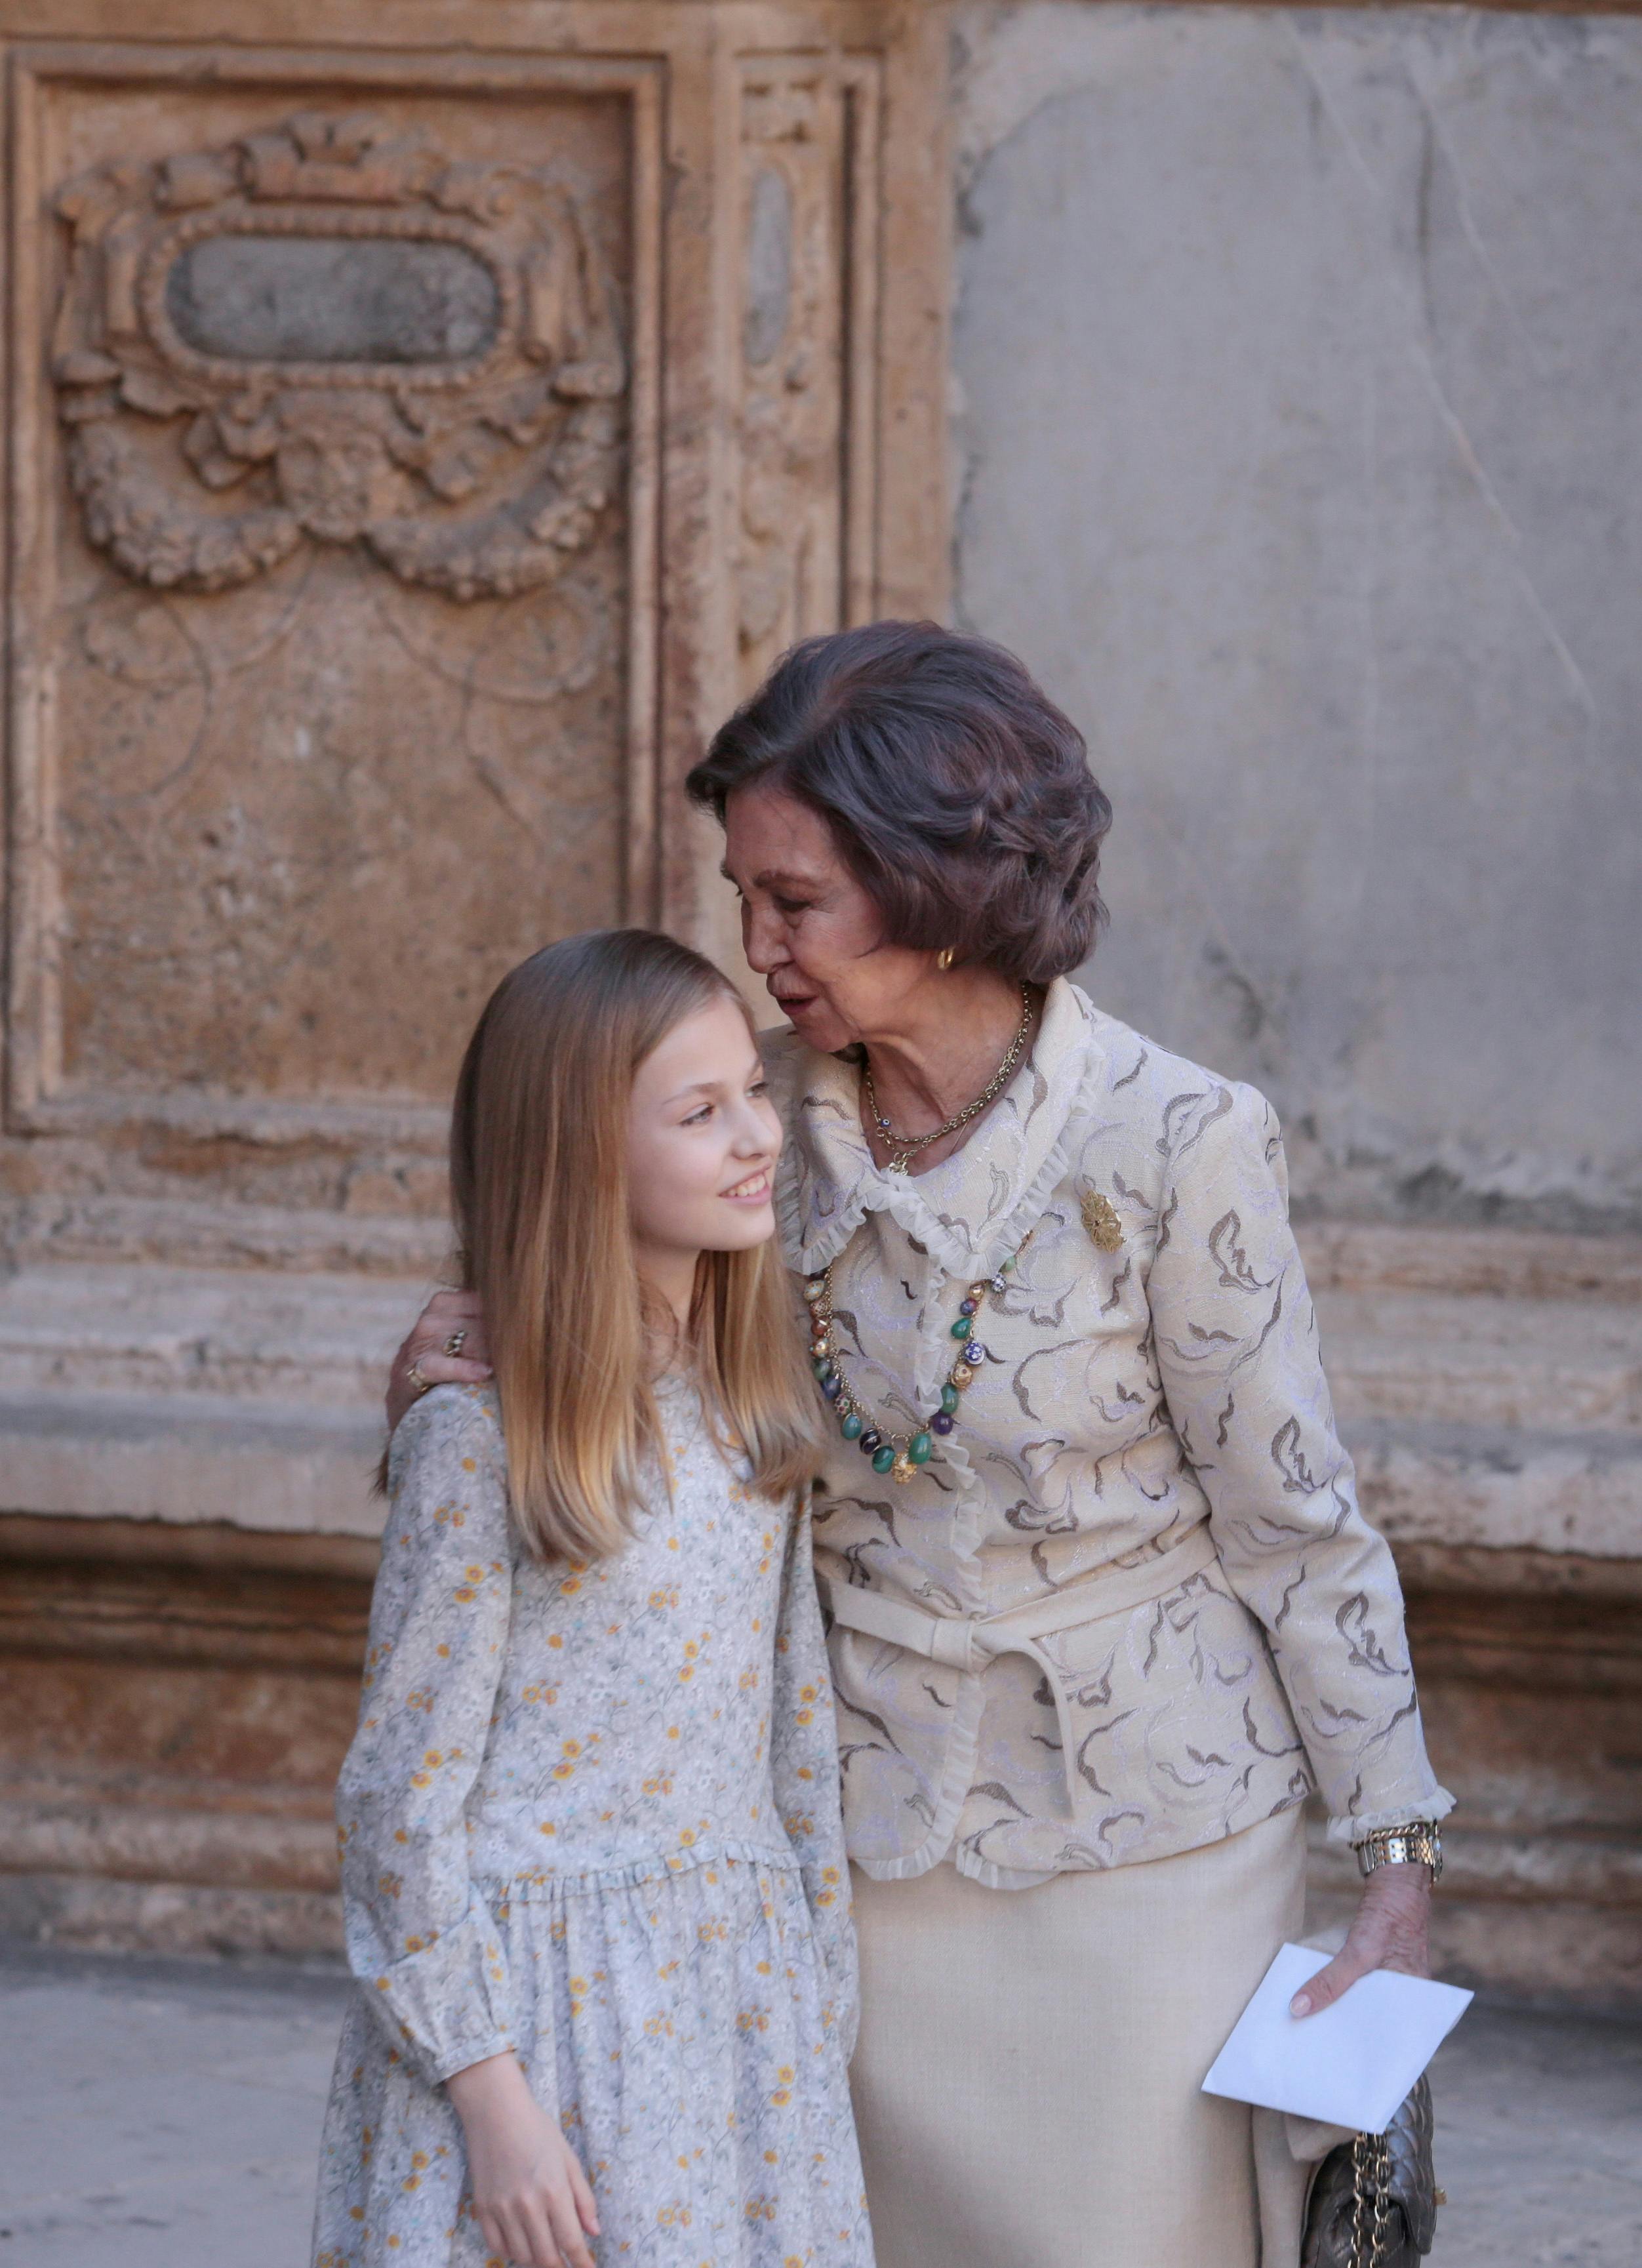 Members of the Spanish Royal Family Queen Sofia and Infanta Leonor pose for the media after attending an Easter Sunday mass at Palma de Mallorca's Cathedral on the Spanish island of Mallorca, Spain April 1, 2018. REUTERS/Enrique Calvo